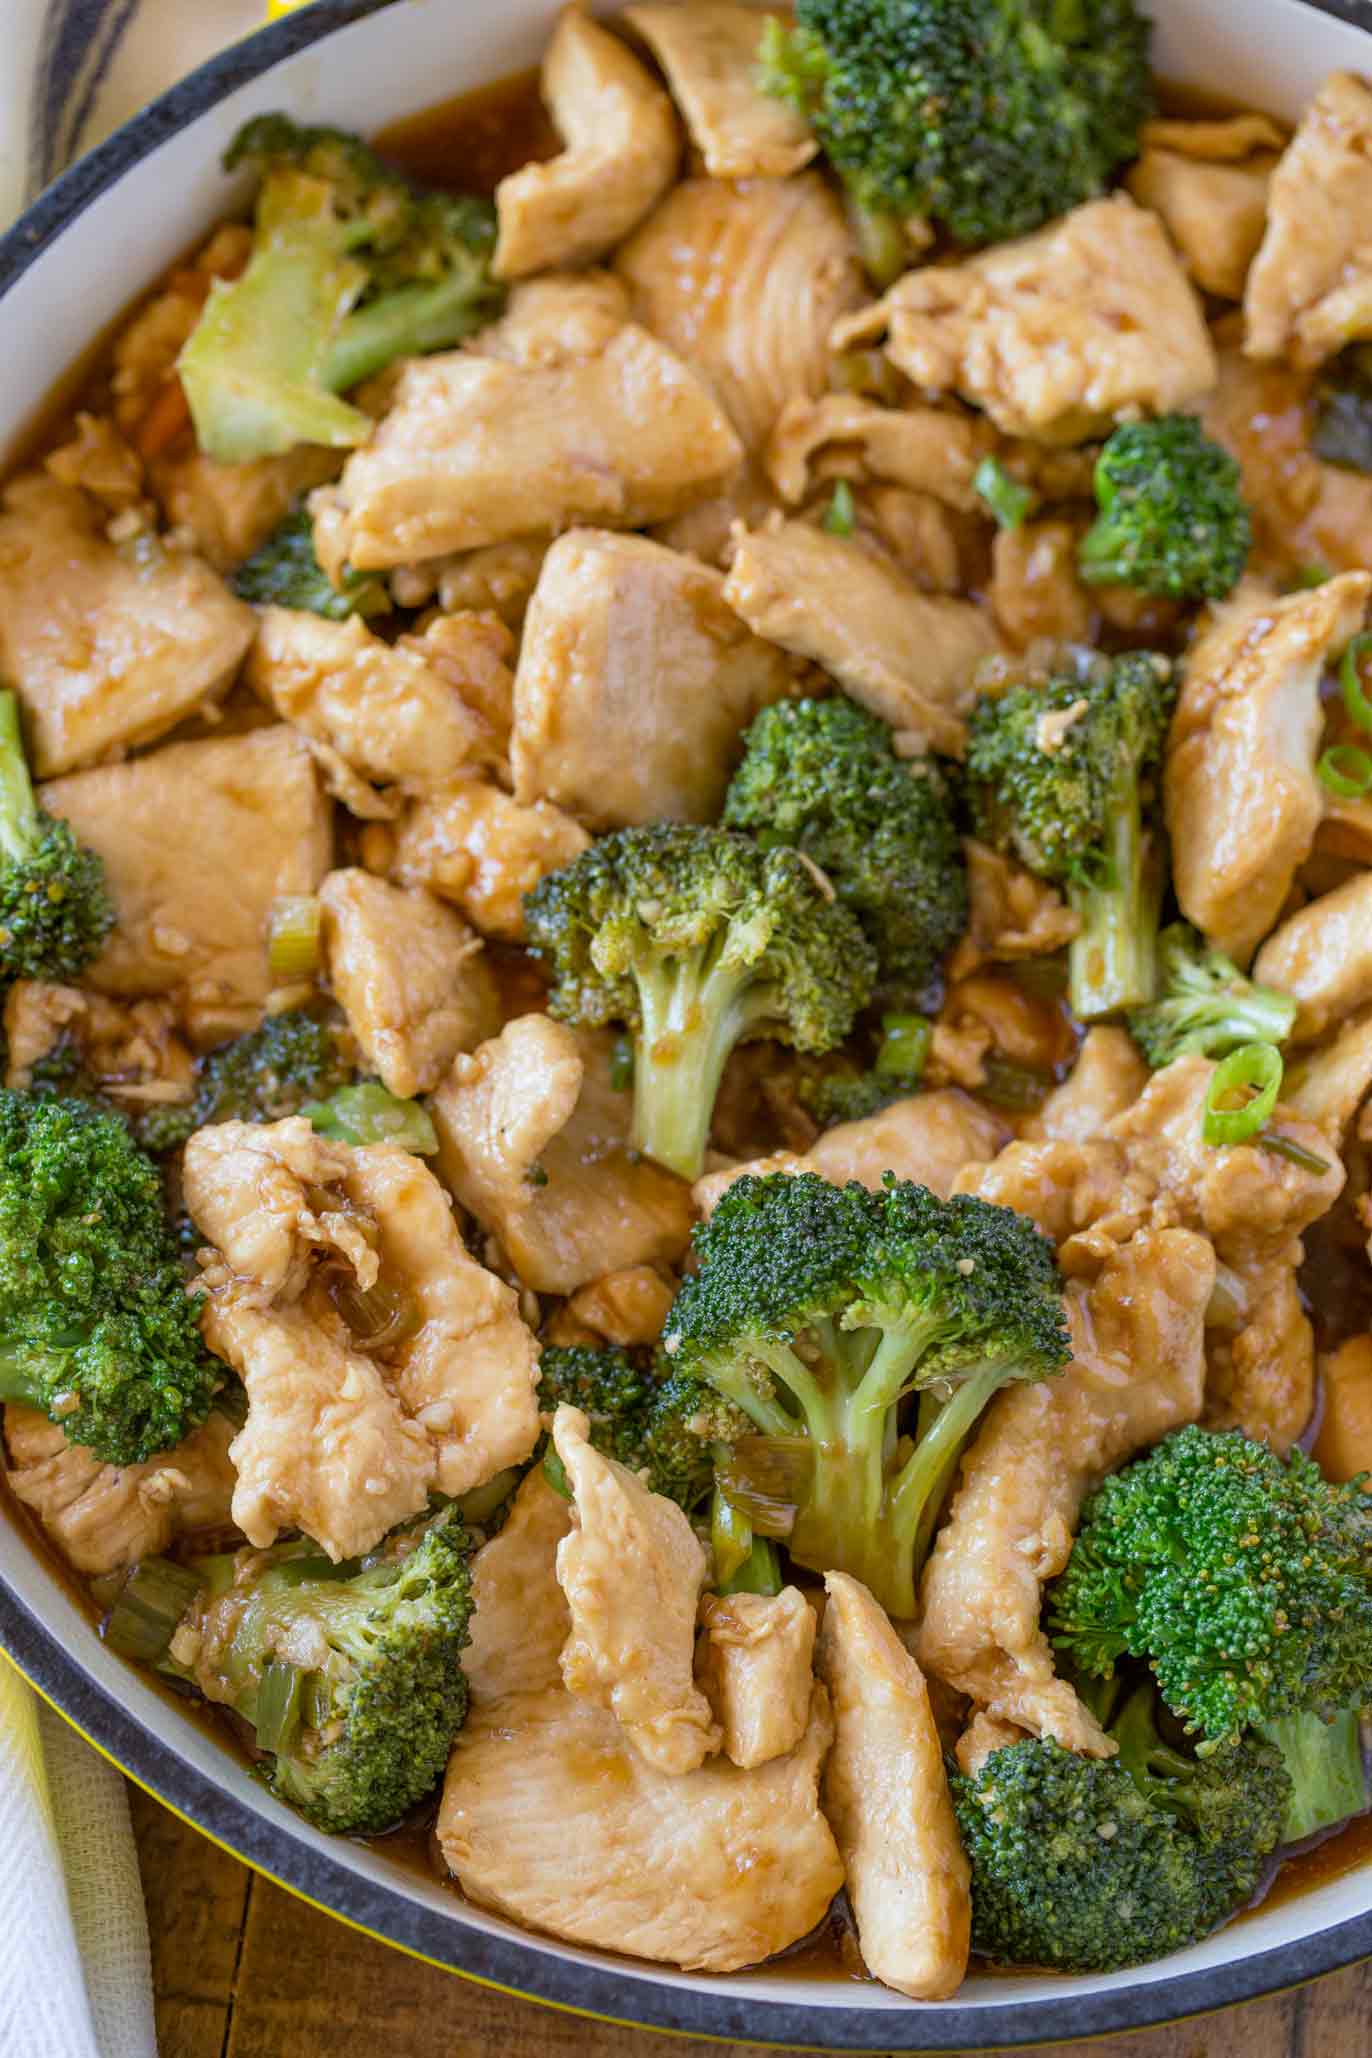 Ginger Chicken Stir Fry - Cooking Made Healthy